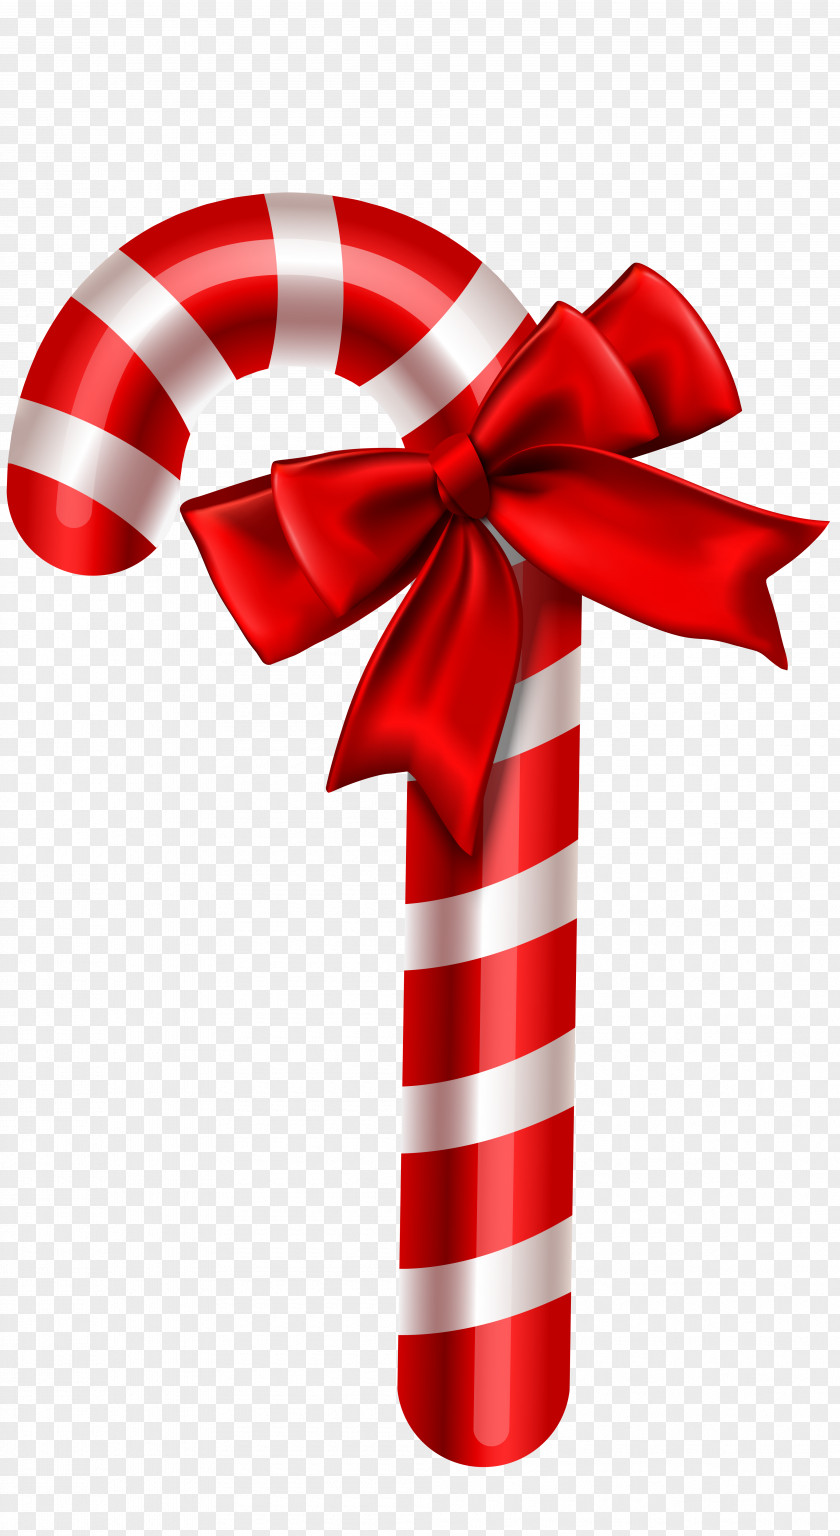 Candy Cane Christmas Ornament Clipart Image Clip Art PNG